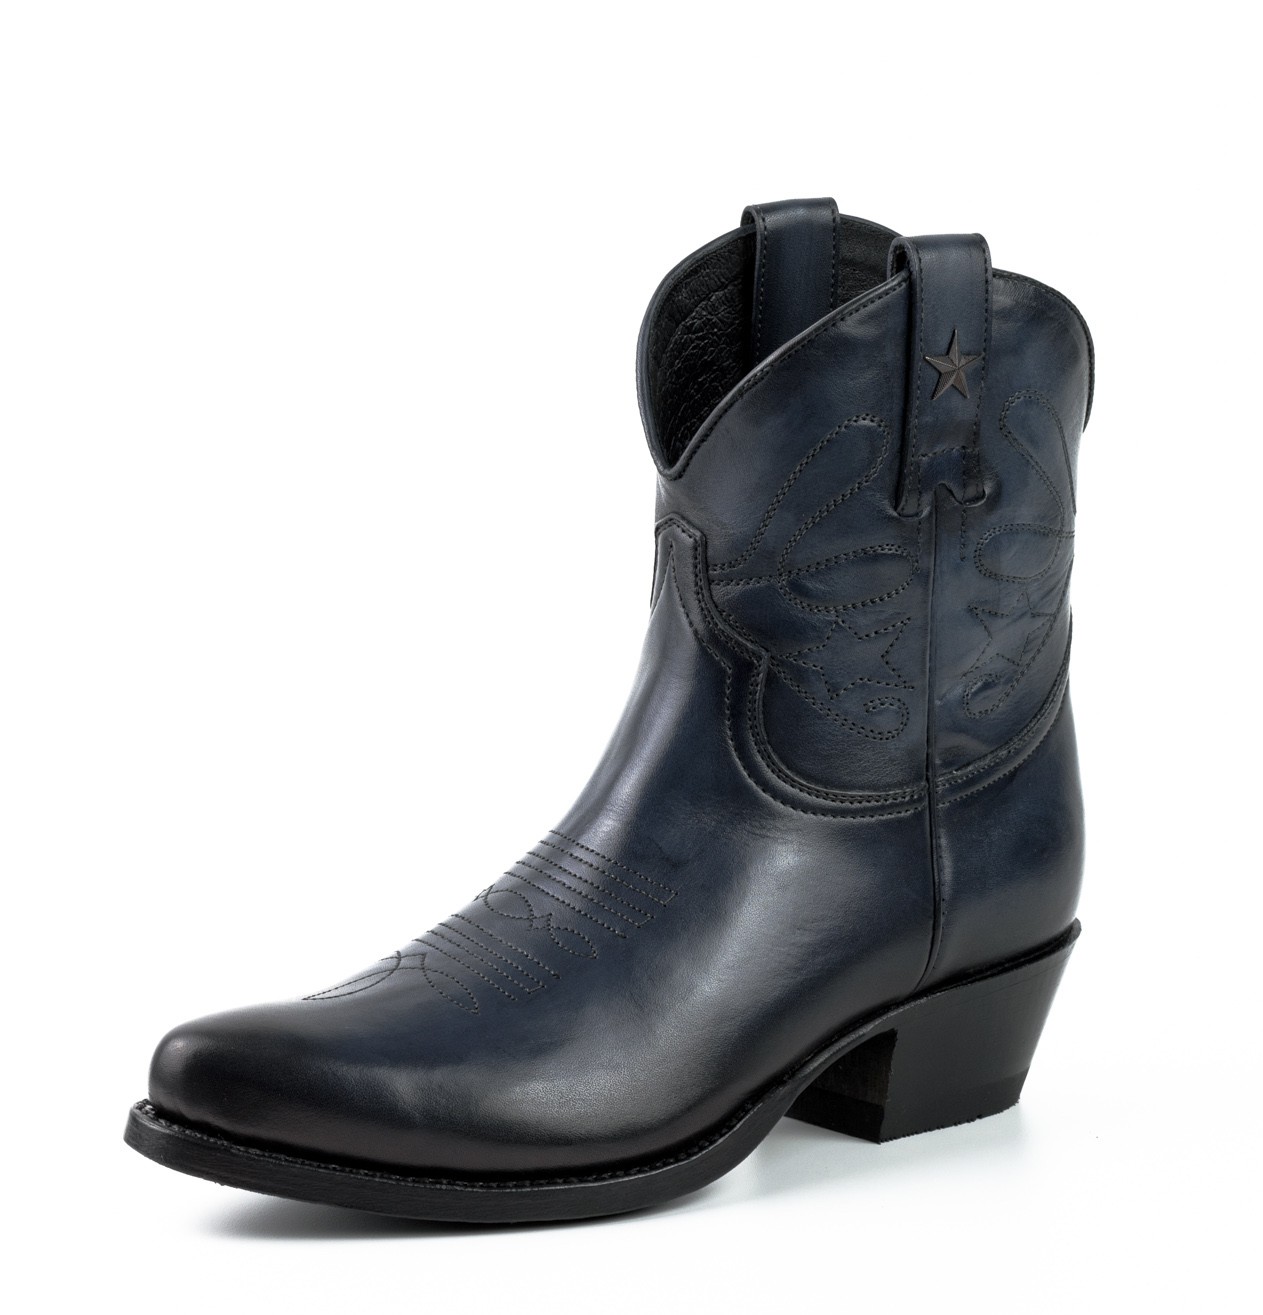 NAVY LEATHER COWBOY ANKLE BOOTS leather 